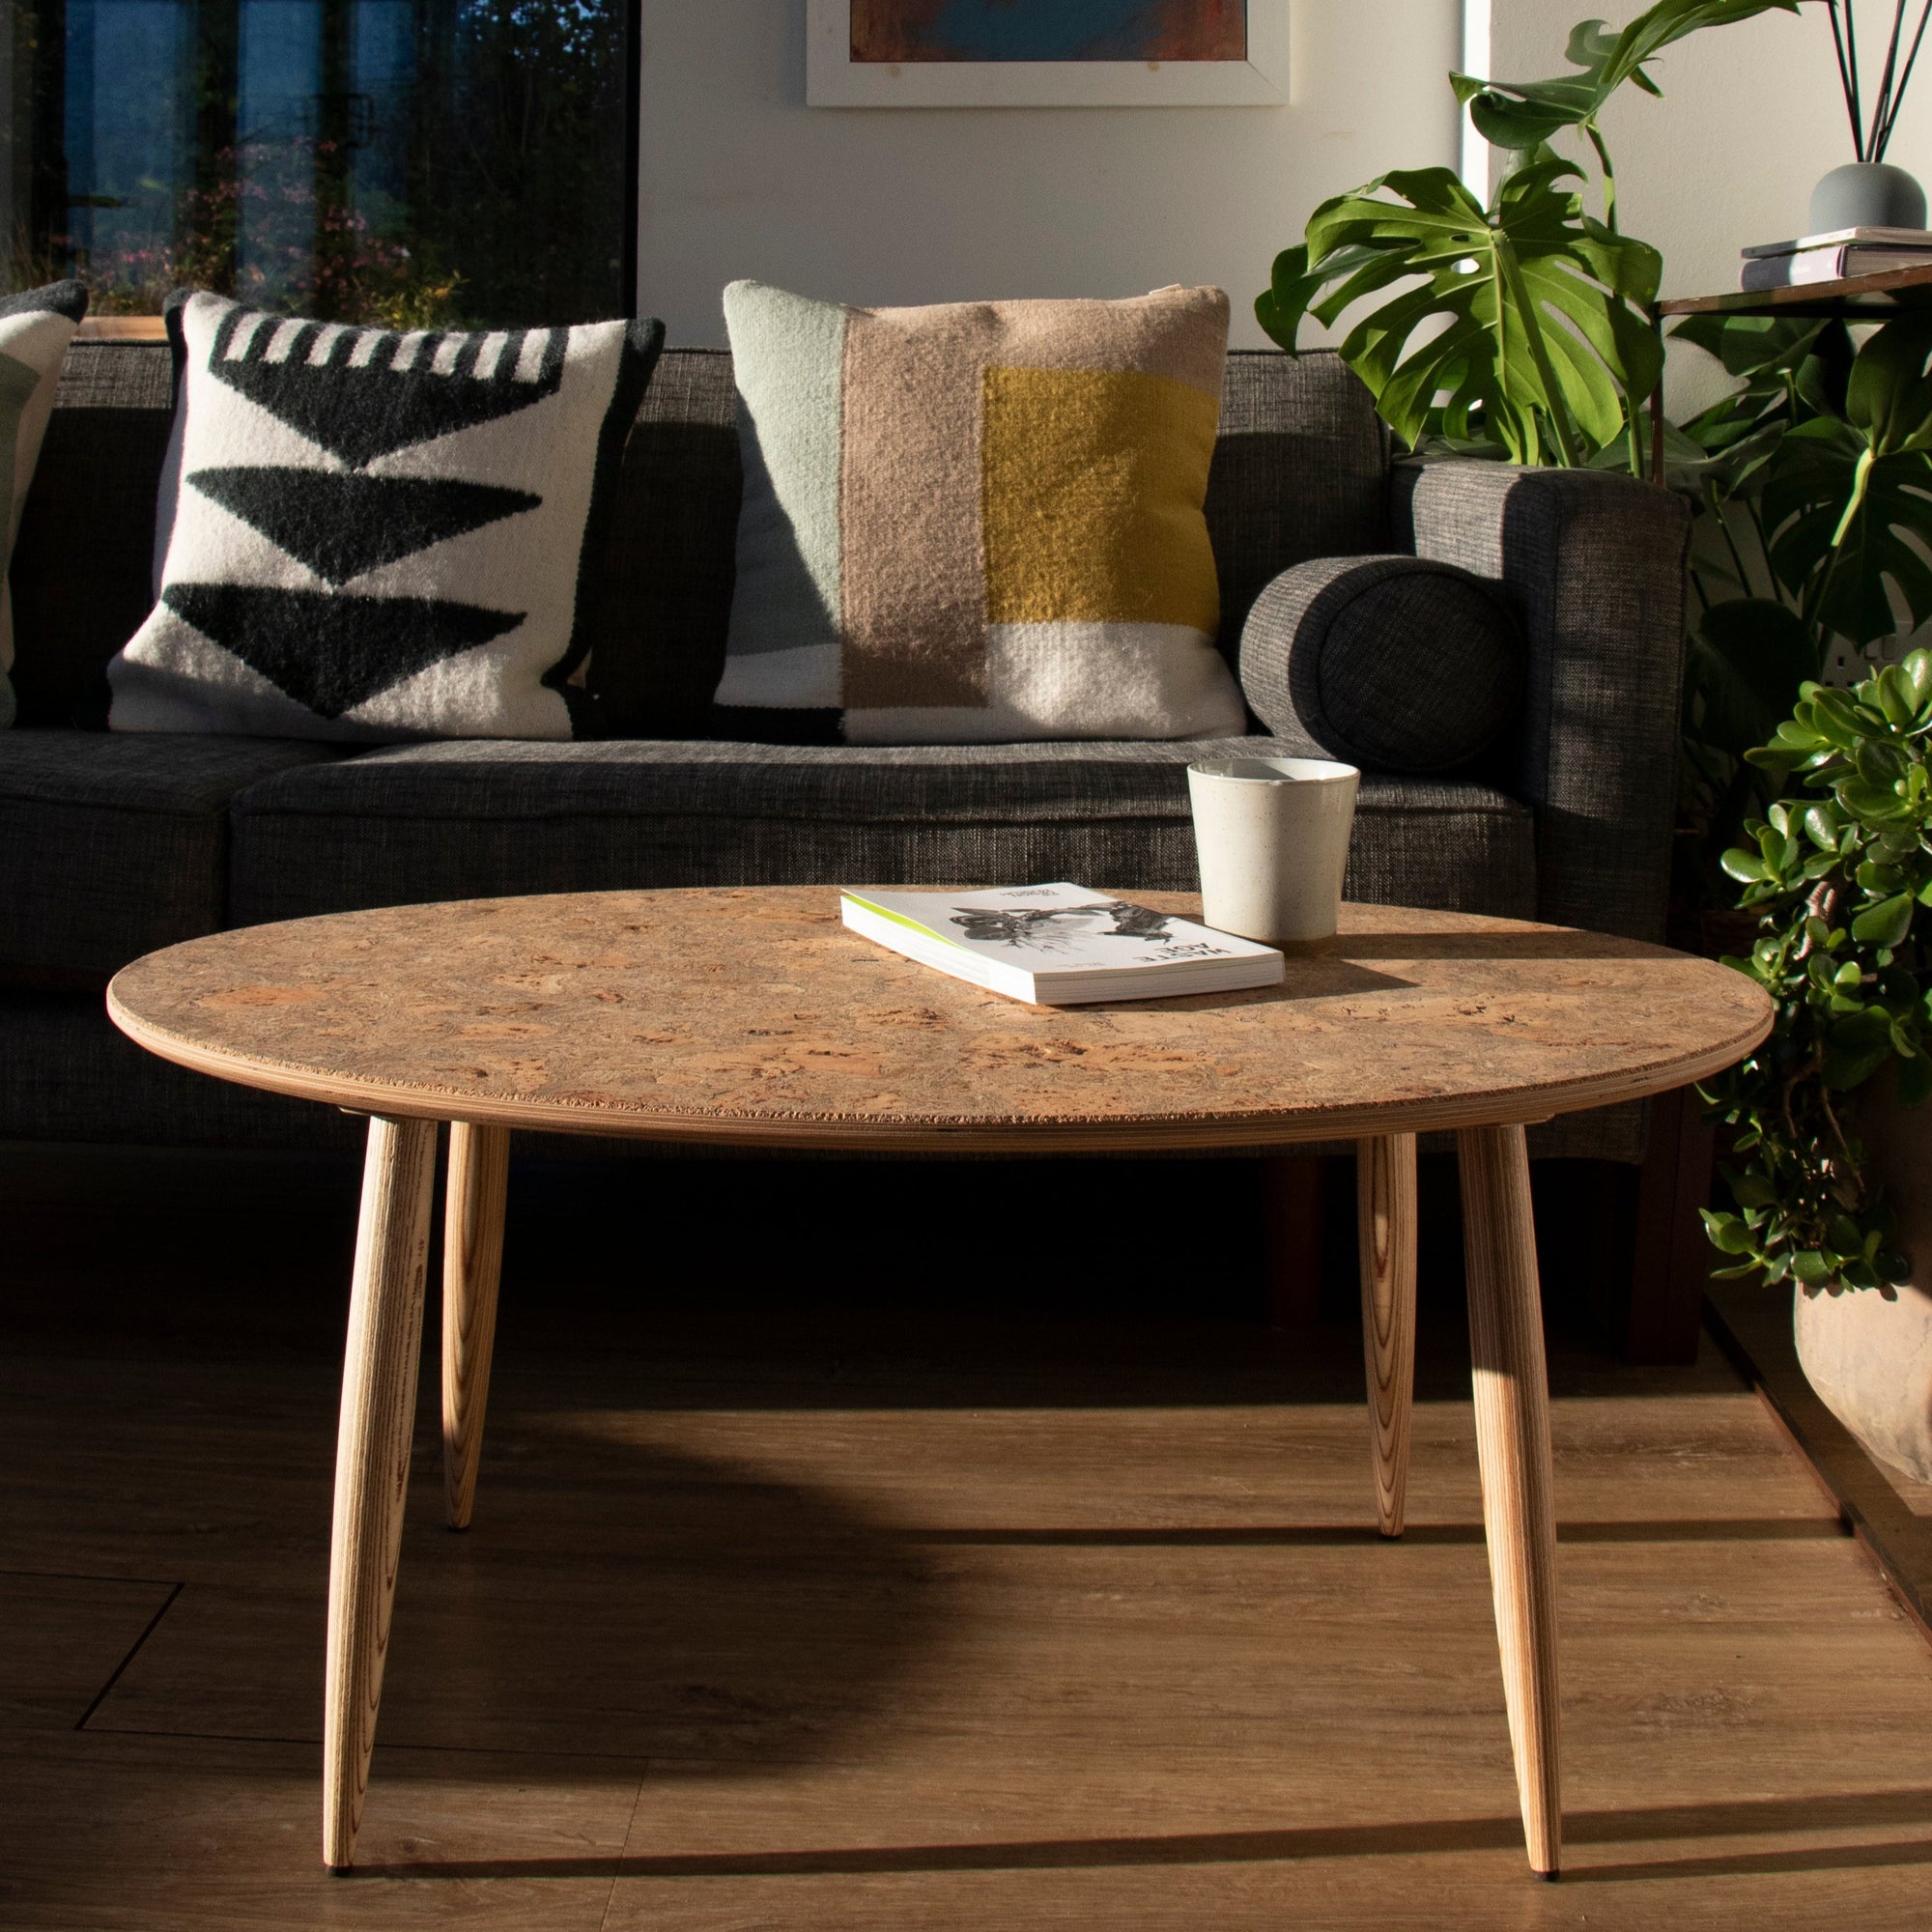 Oval Coffee Table I Natural Cork